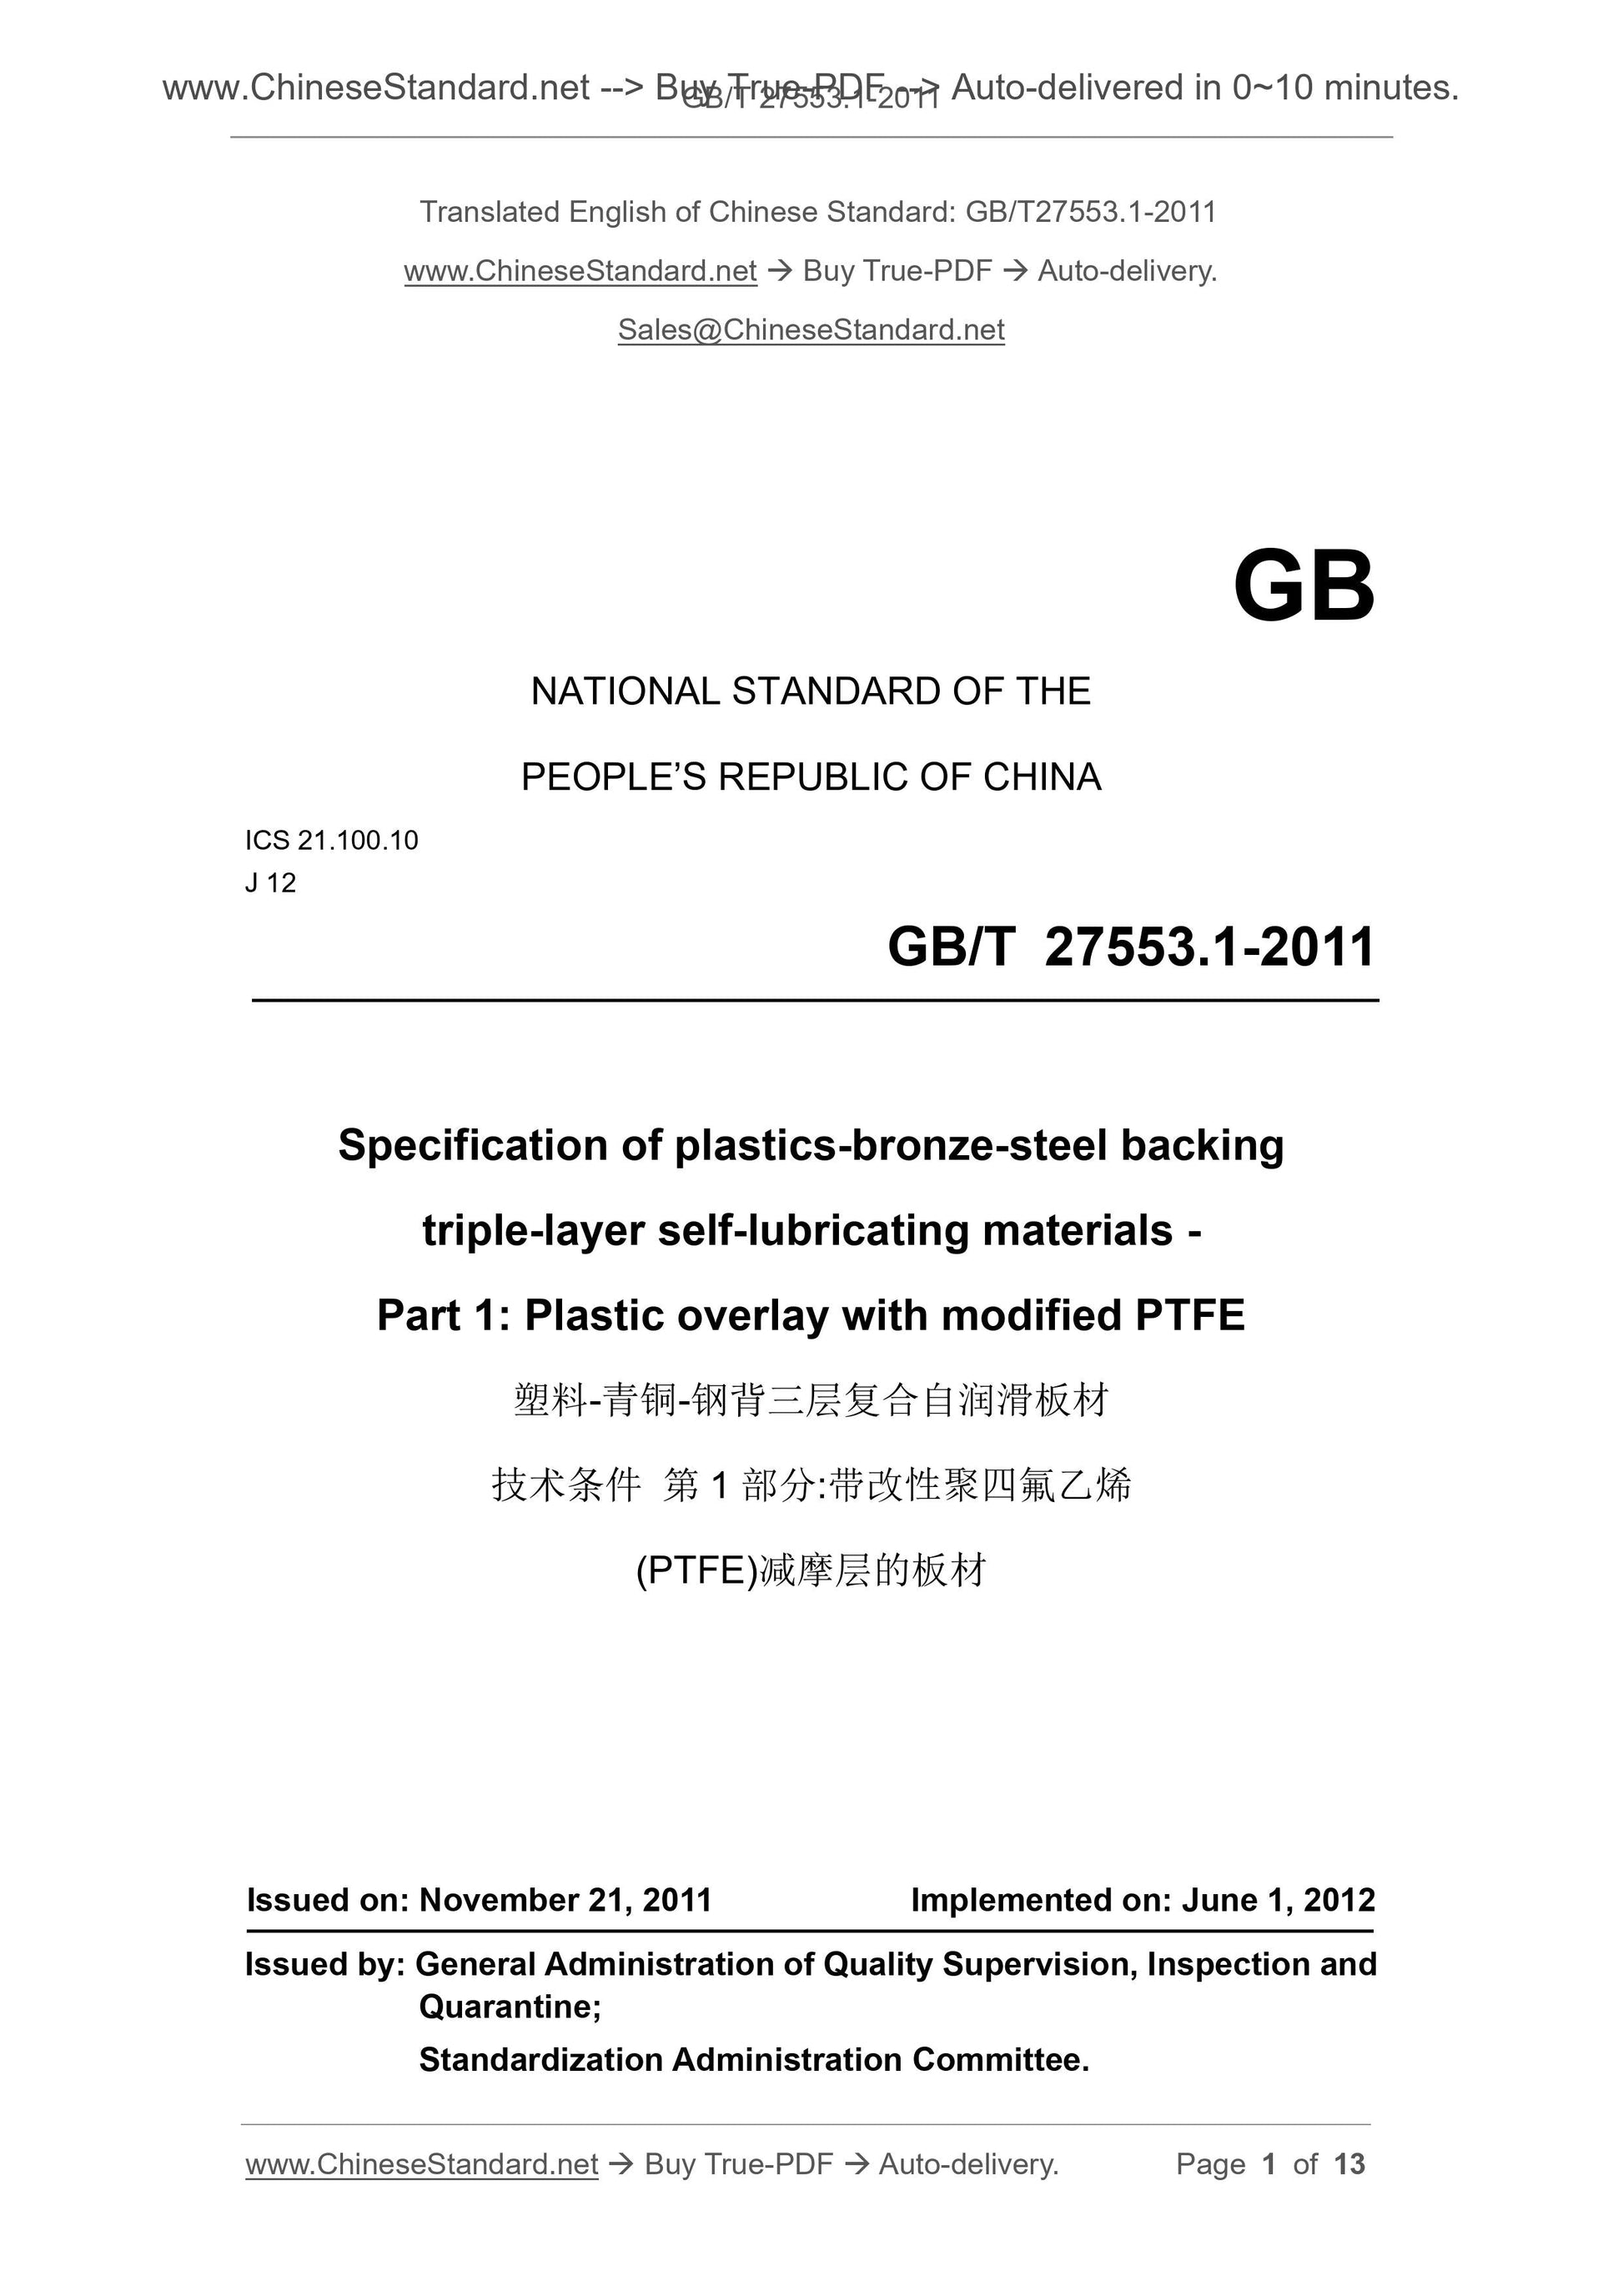 GB/T 27553.1-2011 Page 1